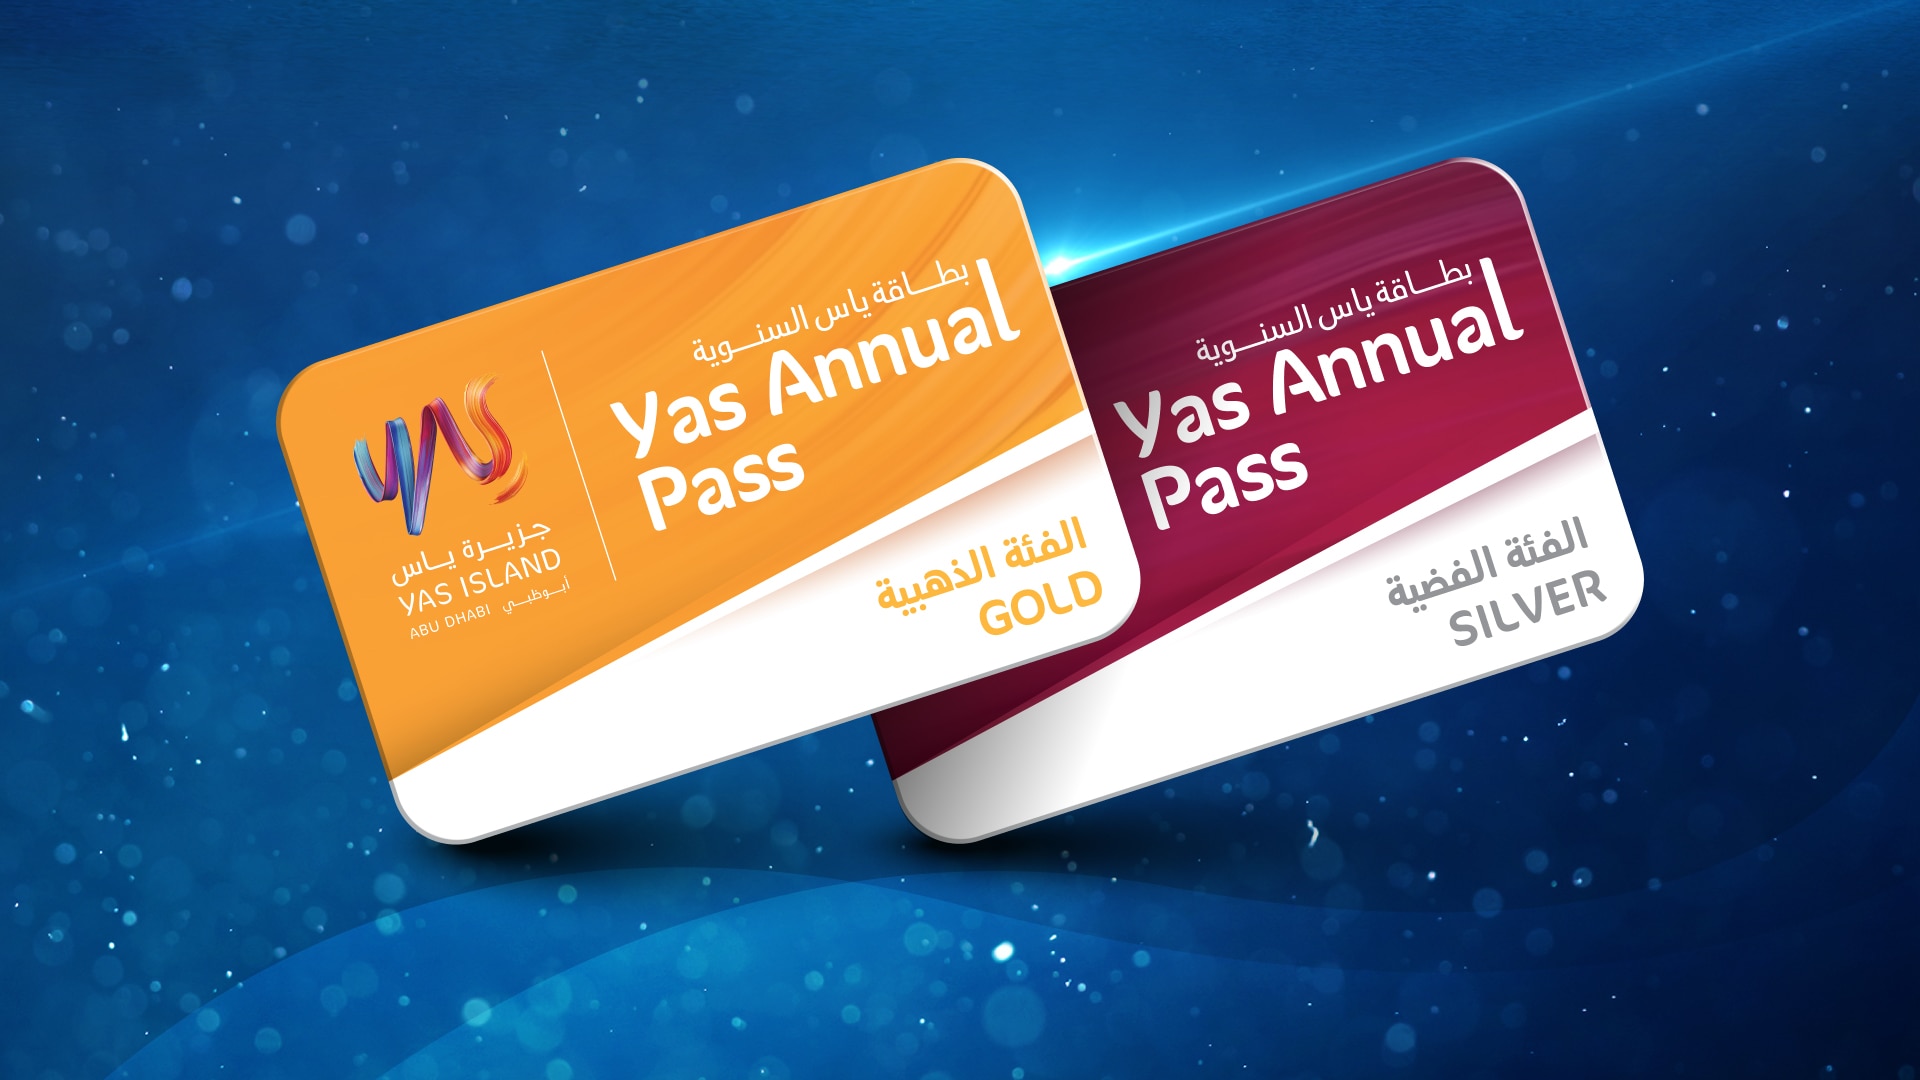 Gold and Silver annual pass cards